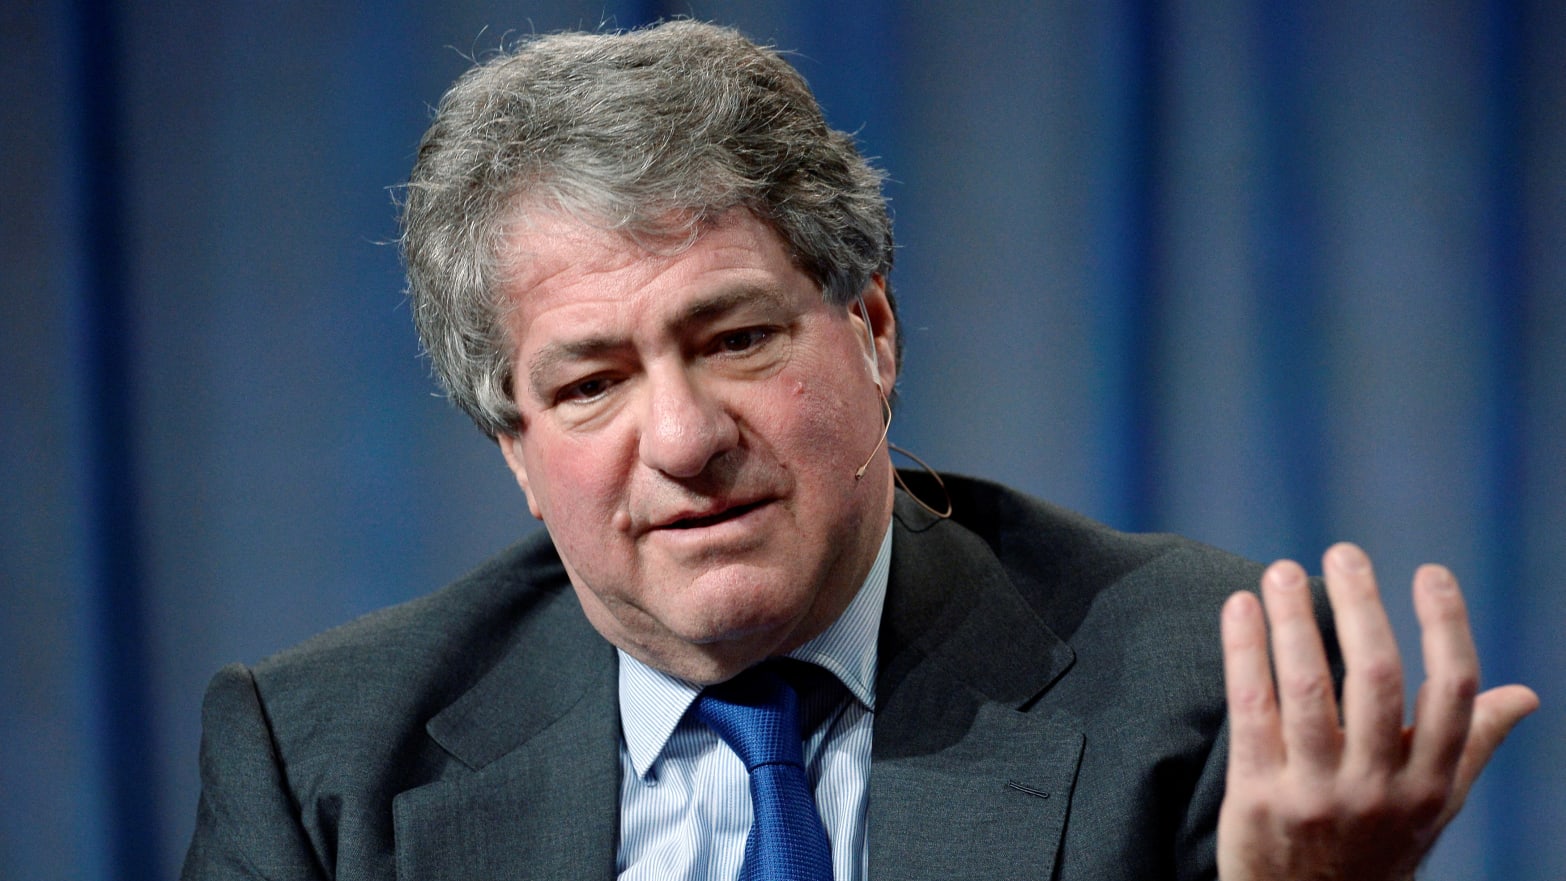 Leon Black, then-Chairman and CEO Apollo Global Management